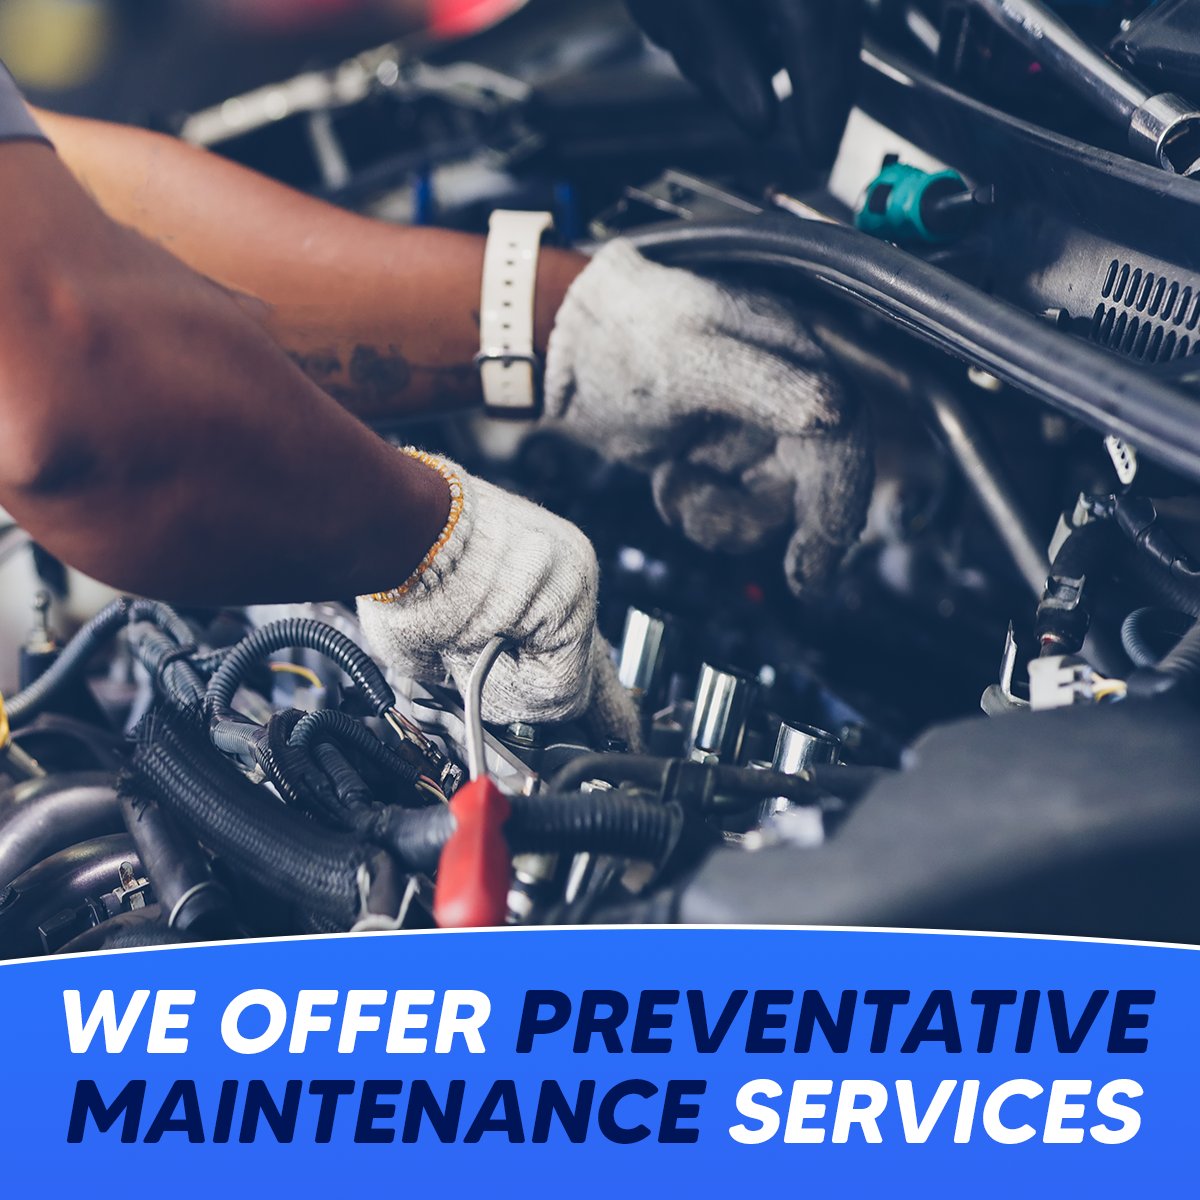 Keeping up with your preventative maintenance is important to keep your vehicle on the road.